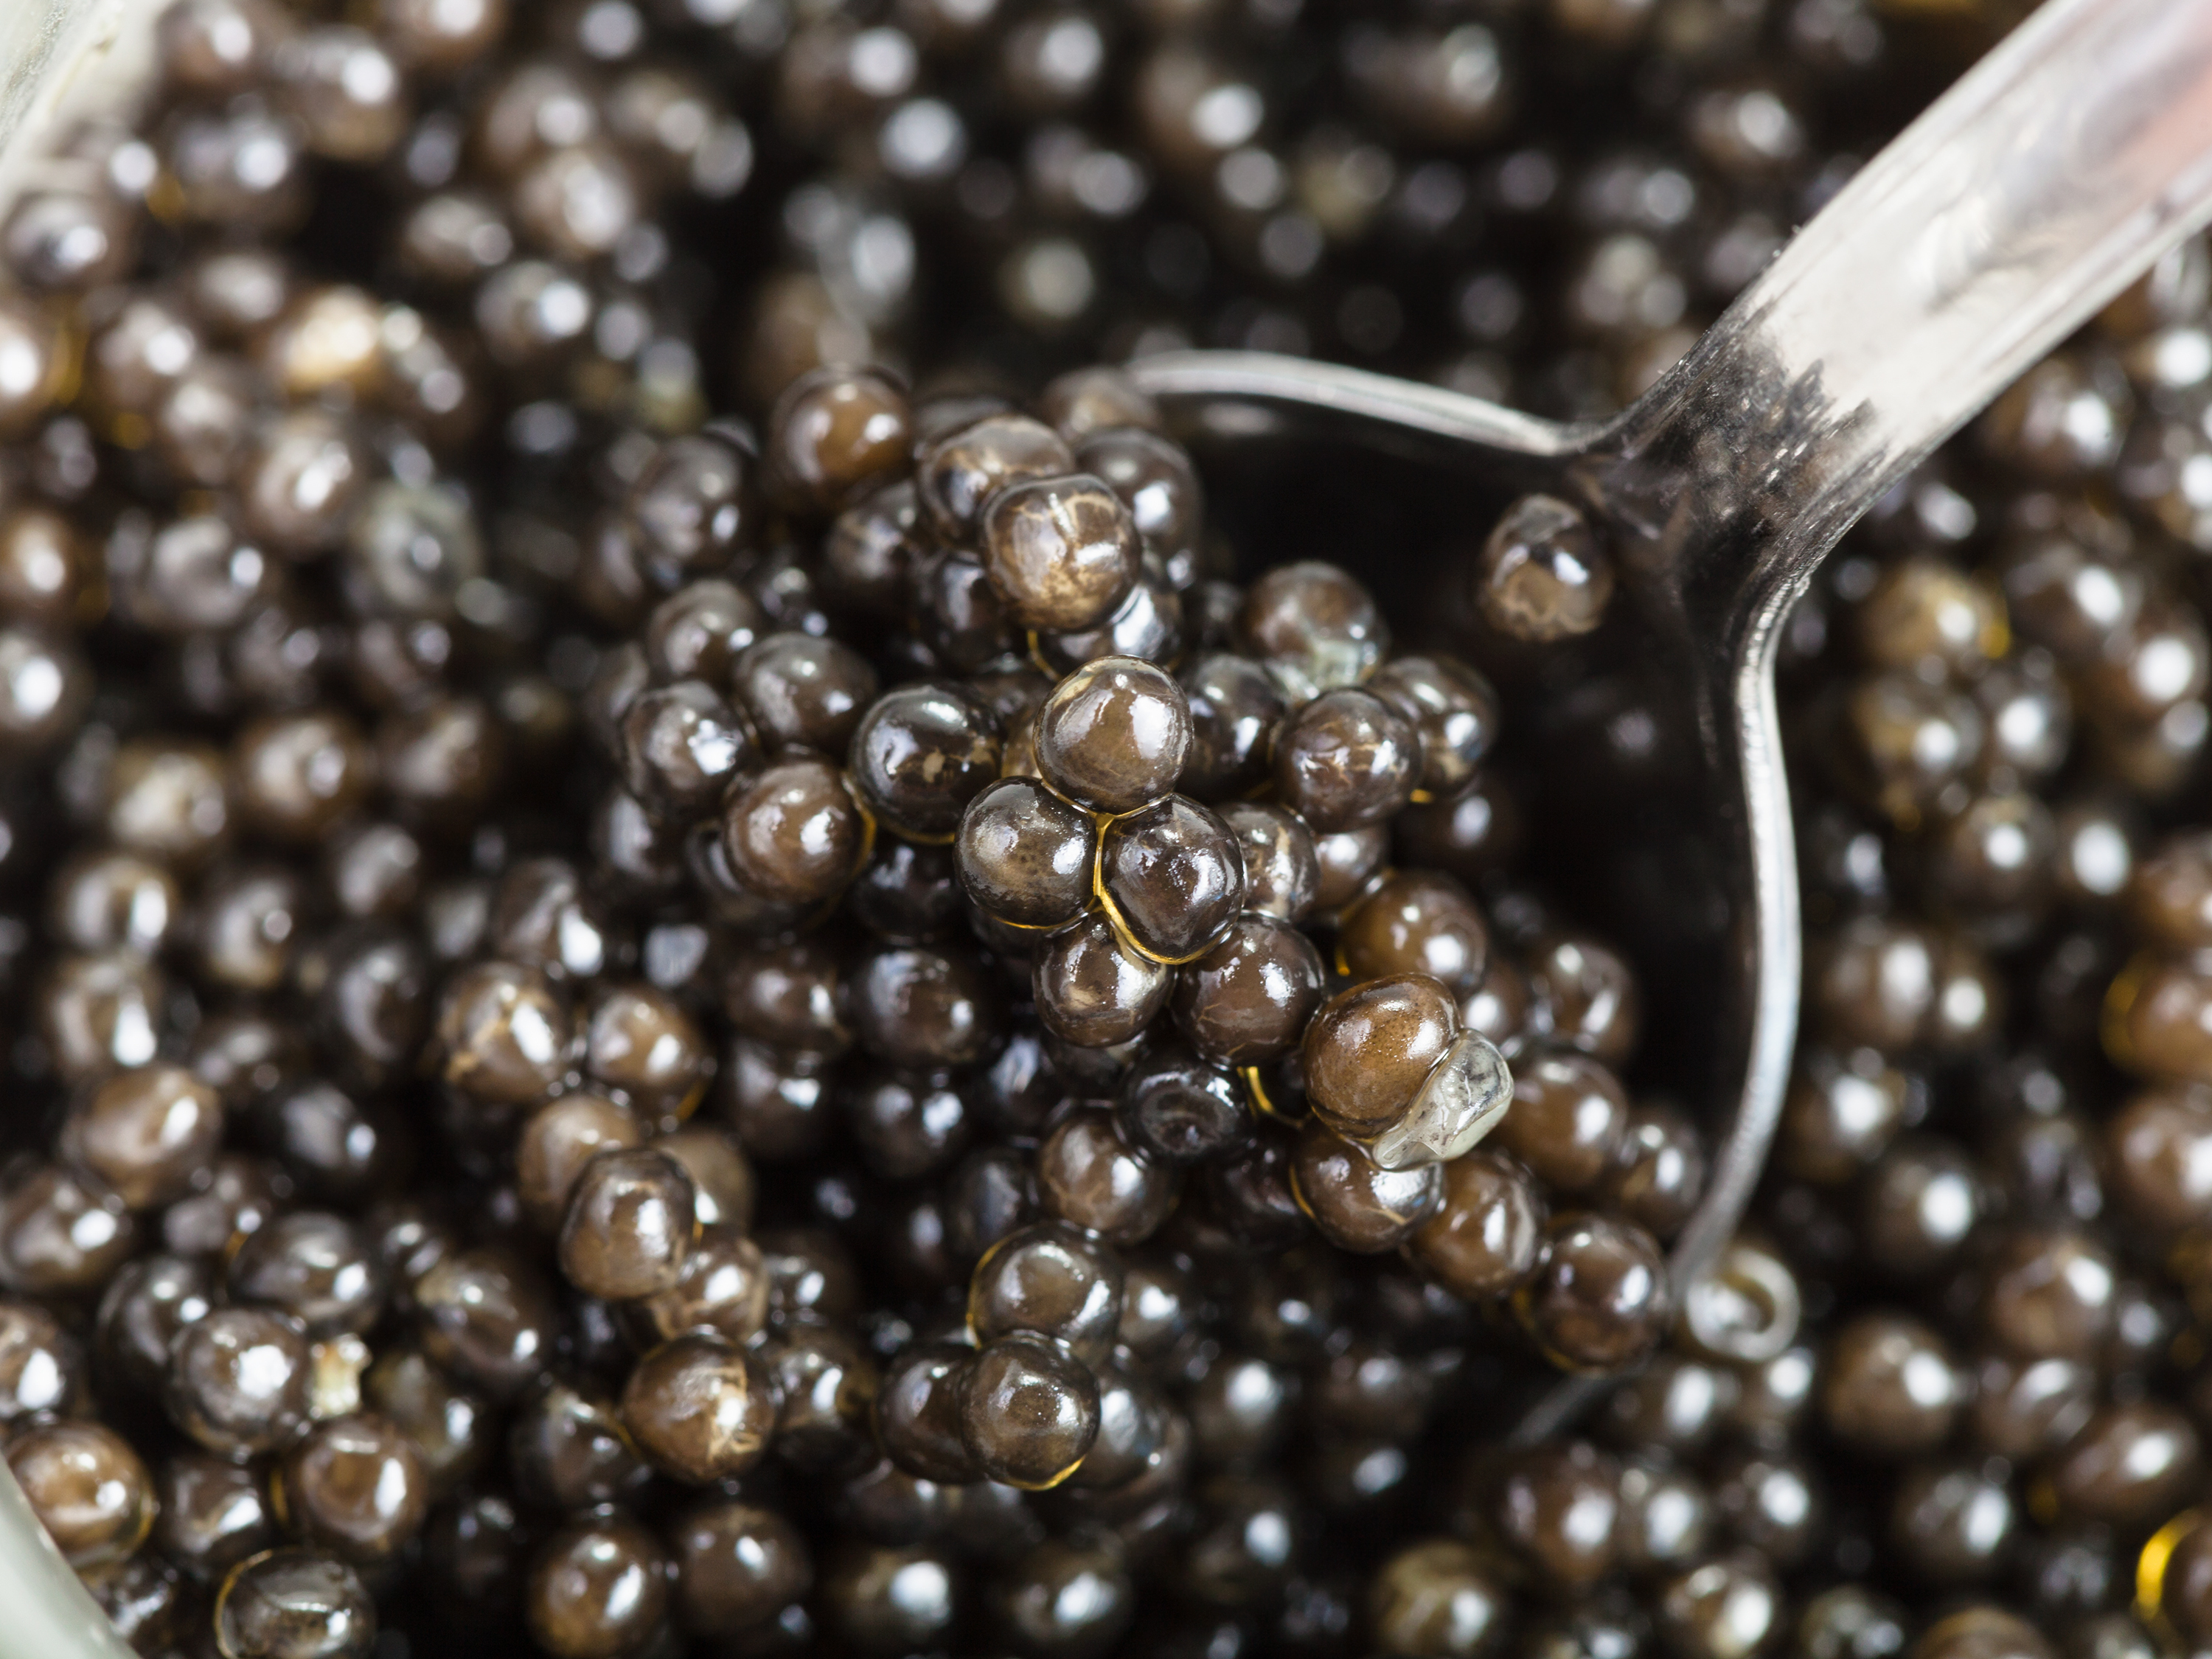 Close-up of a small spoon digging into a pile of caviar.